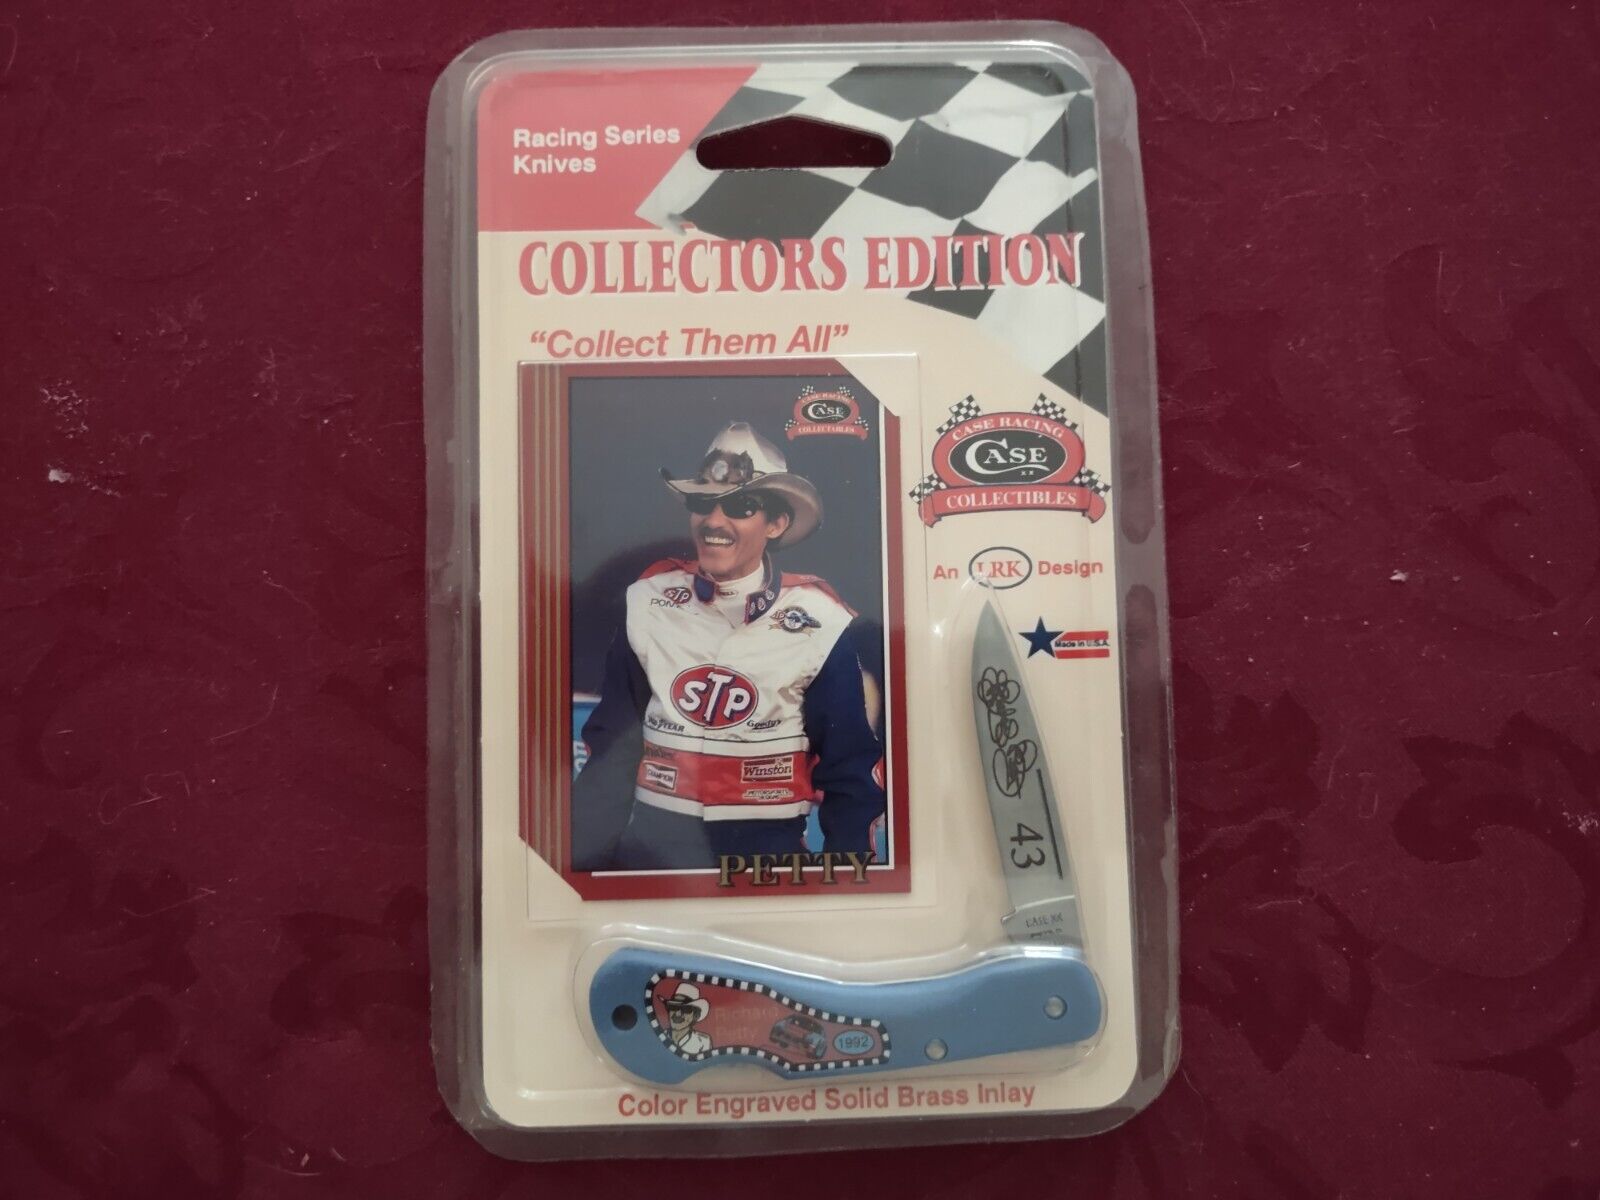 Case Collectibles Collectors Edition Richard Petty Knife 1992